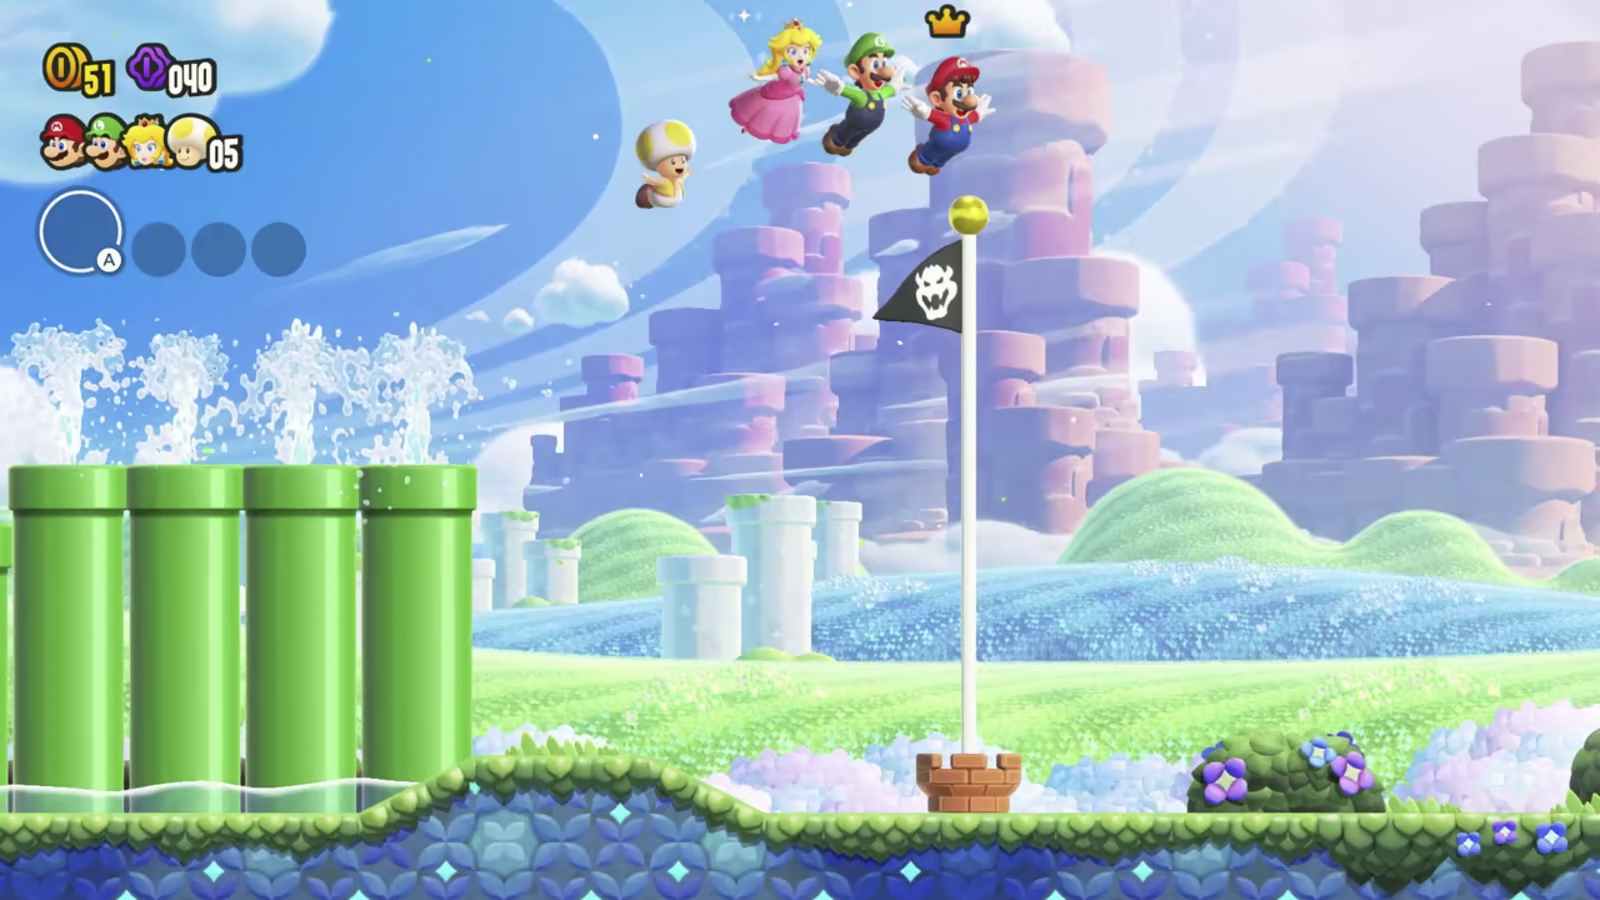 Yellow Toad, Peach, Luigi and Mario fly over the flag in Super Mario Bros. Wonder